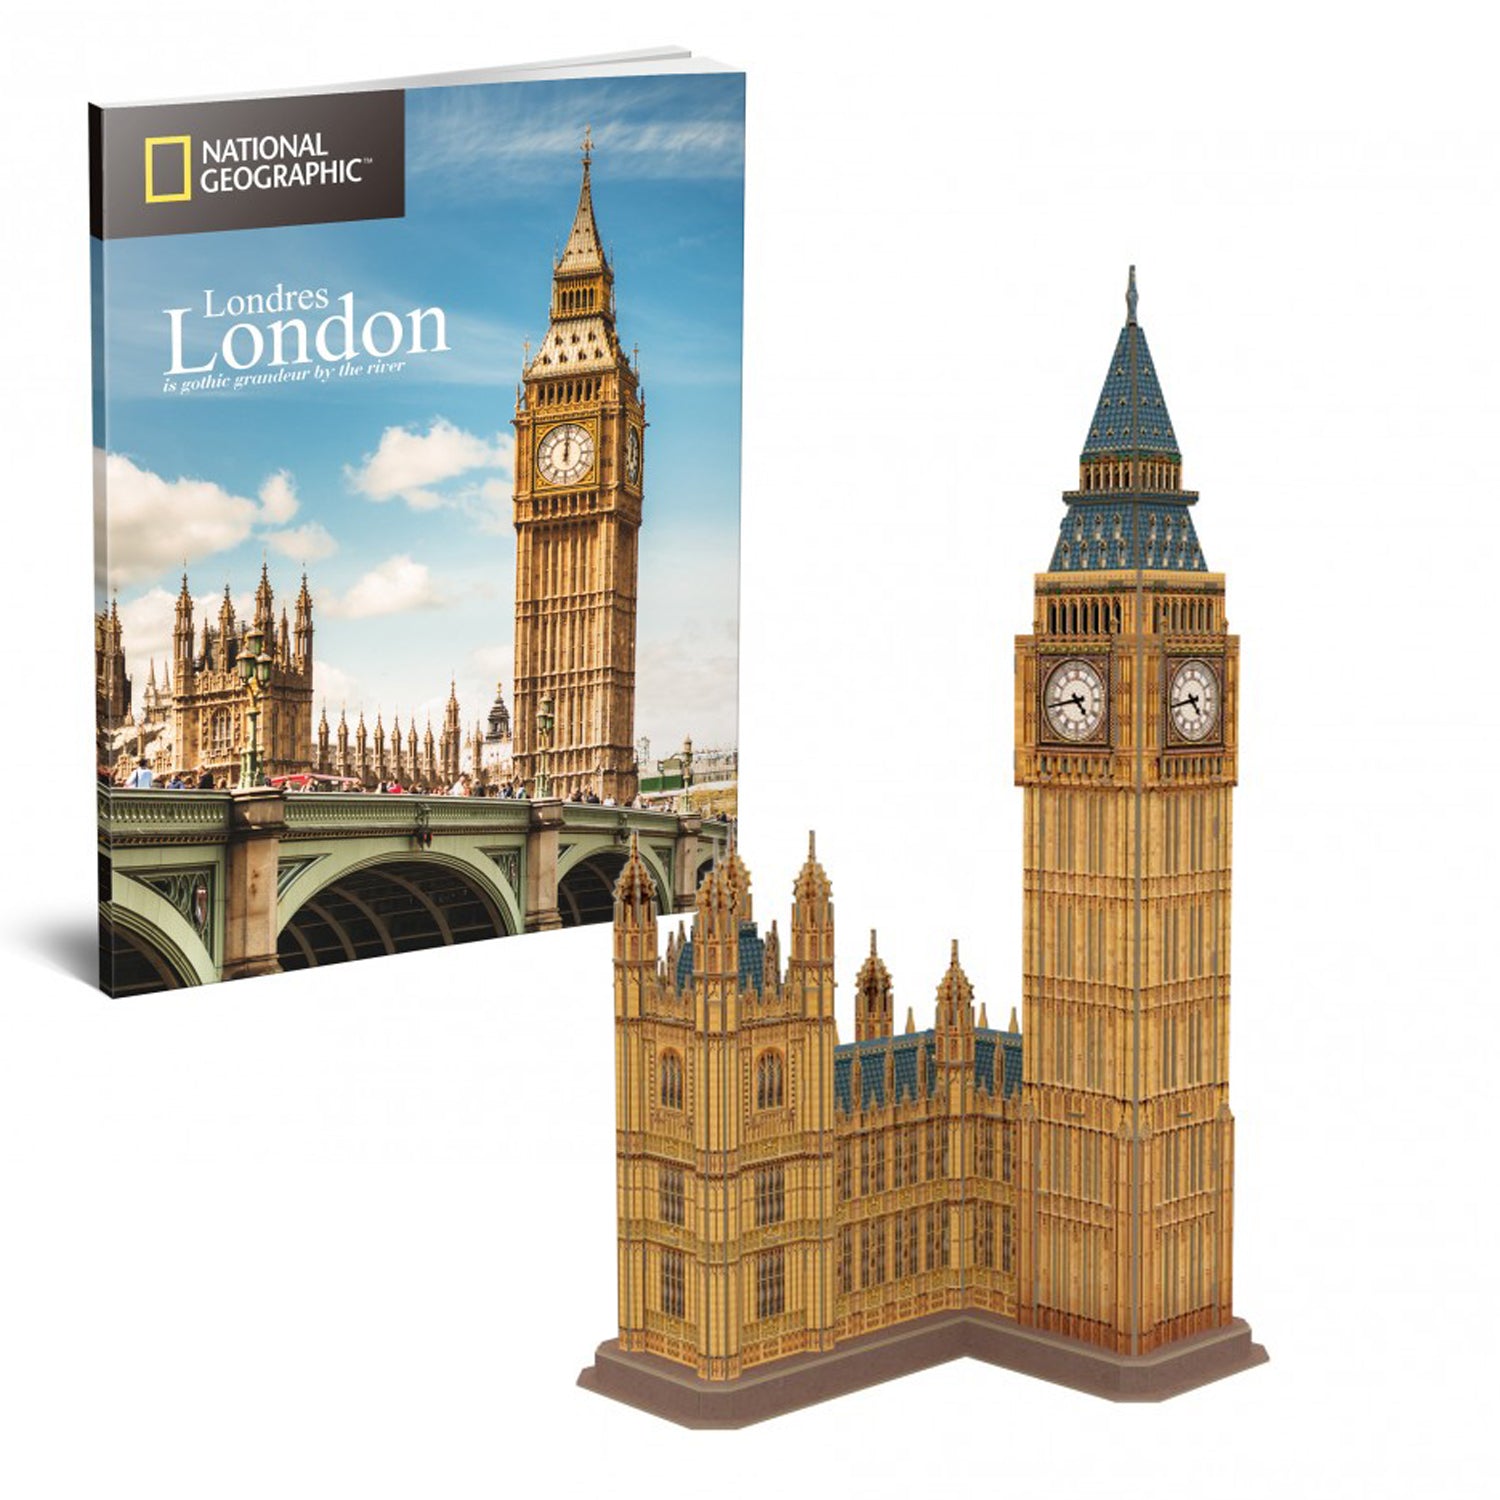 National Geographic Big Ben 3D Model and Photo Book